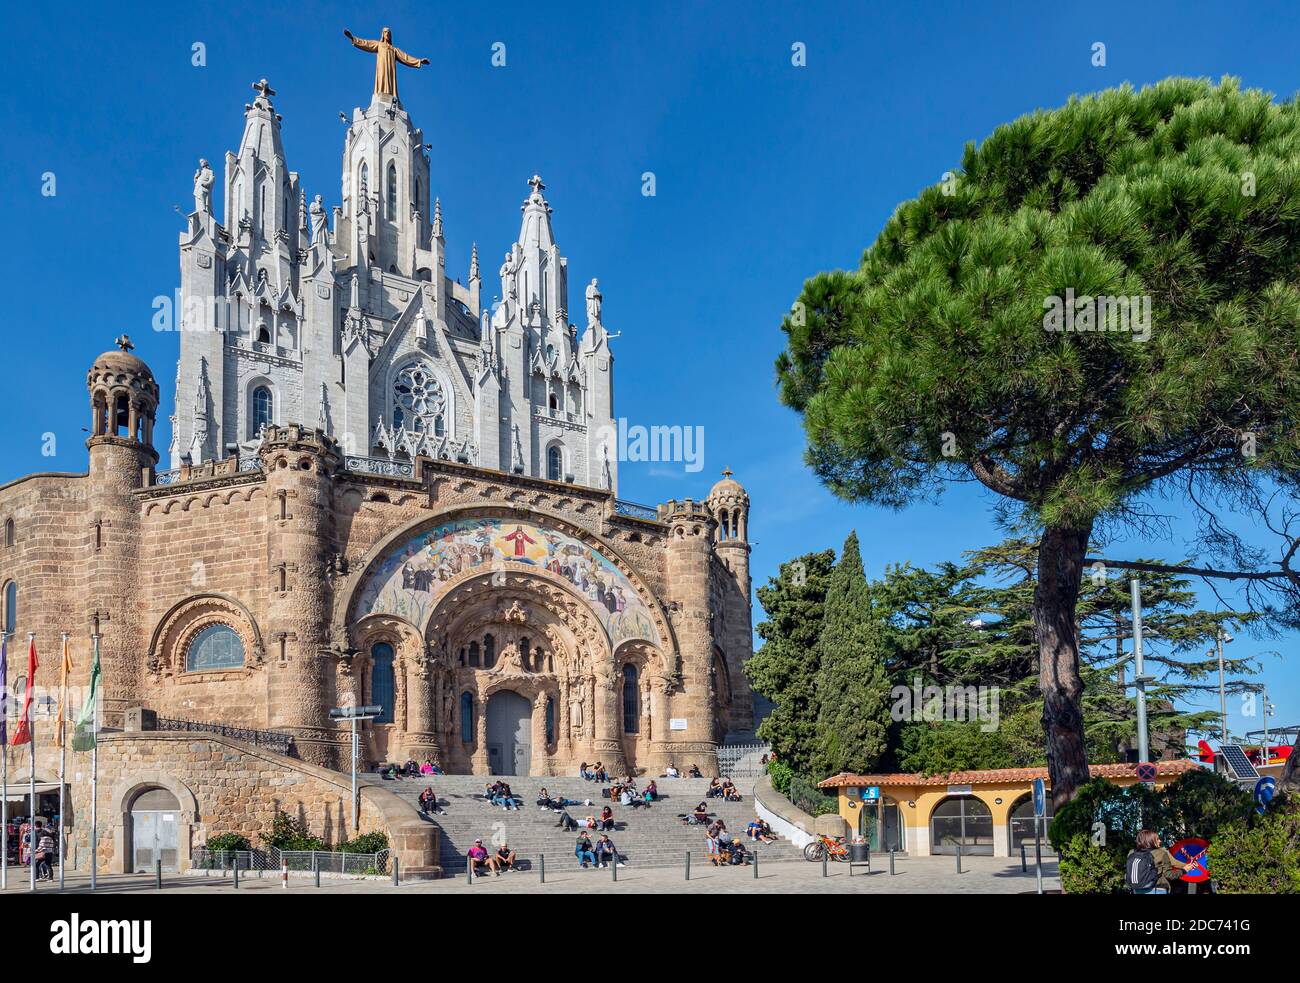 People relaxing in front of Tibidabo church on mountain in Barcelona Stock Photo